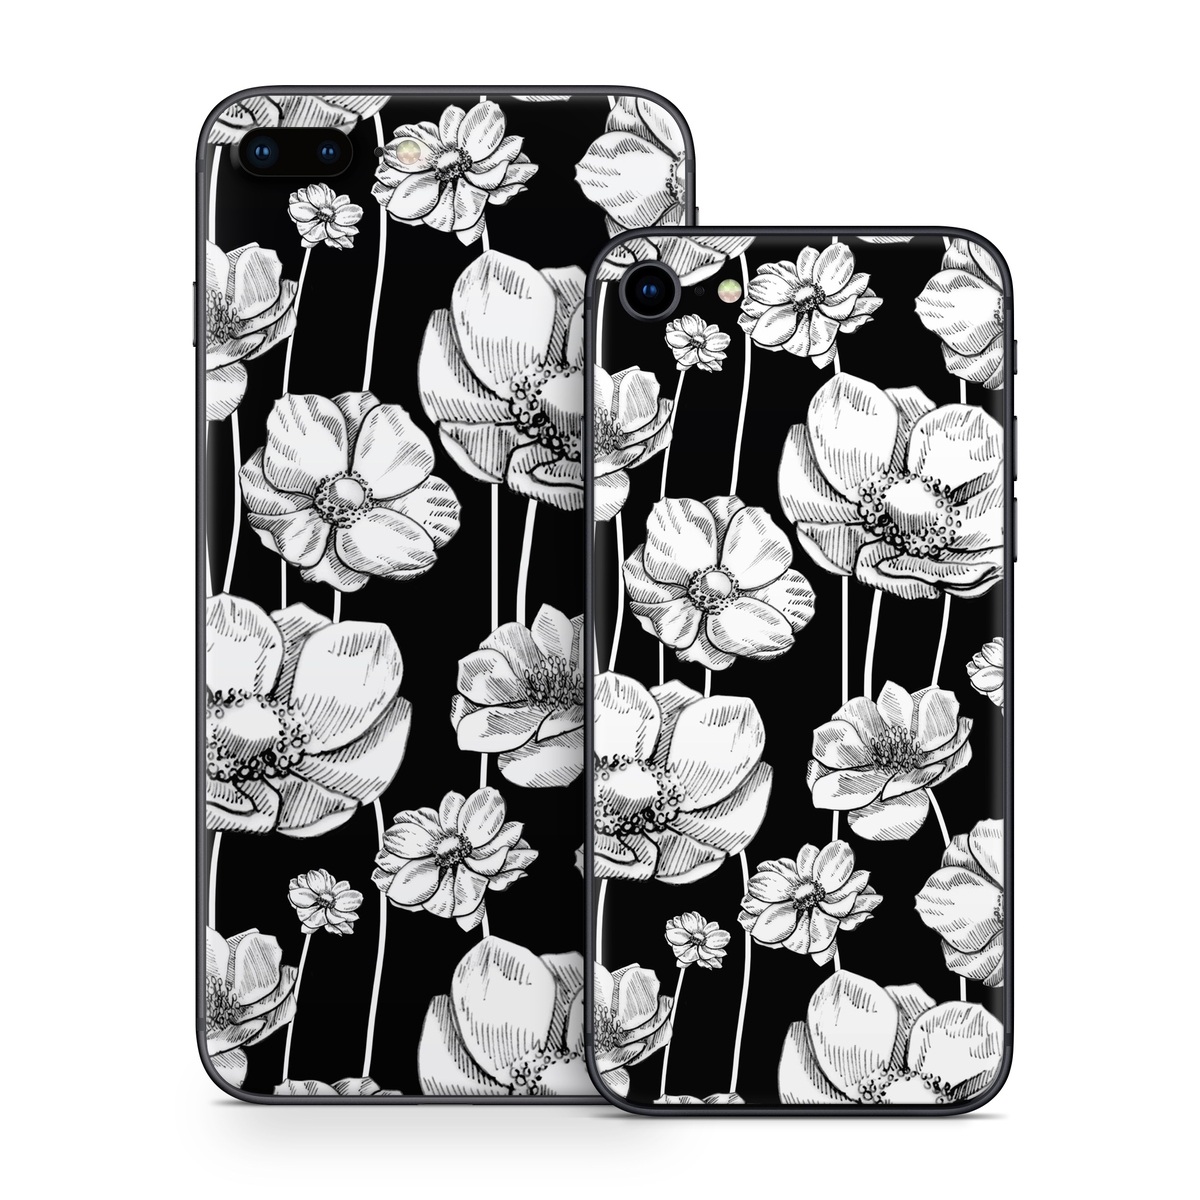 iPhone 8 Series Skin design of Flower, Black-and-white, Plant, Botany, Petal, Design, Wildflower, Monochrome photography, Pattern, Monochrome, with black, gray, white colors